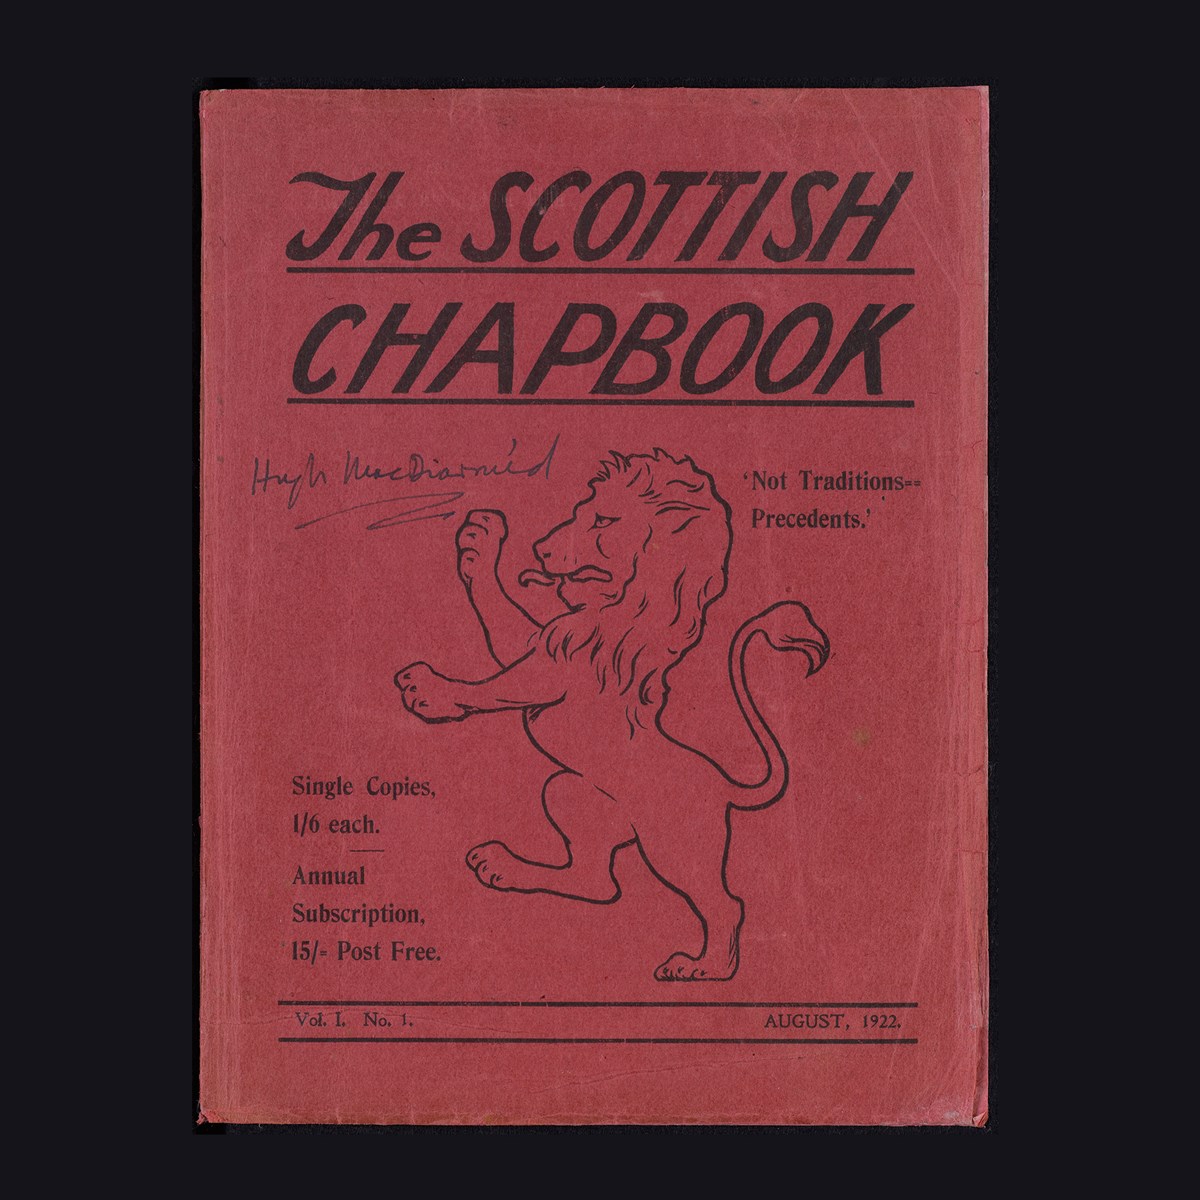 Caption: The Scottish chapbook, Publication edited by Hugh MacDiarmid, signed front cover, Vol.1 No.1, 1922